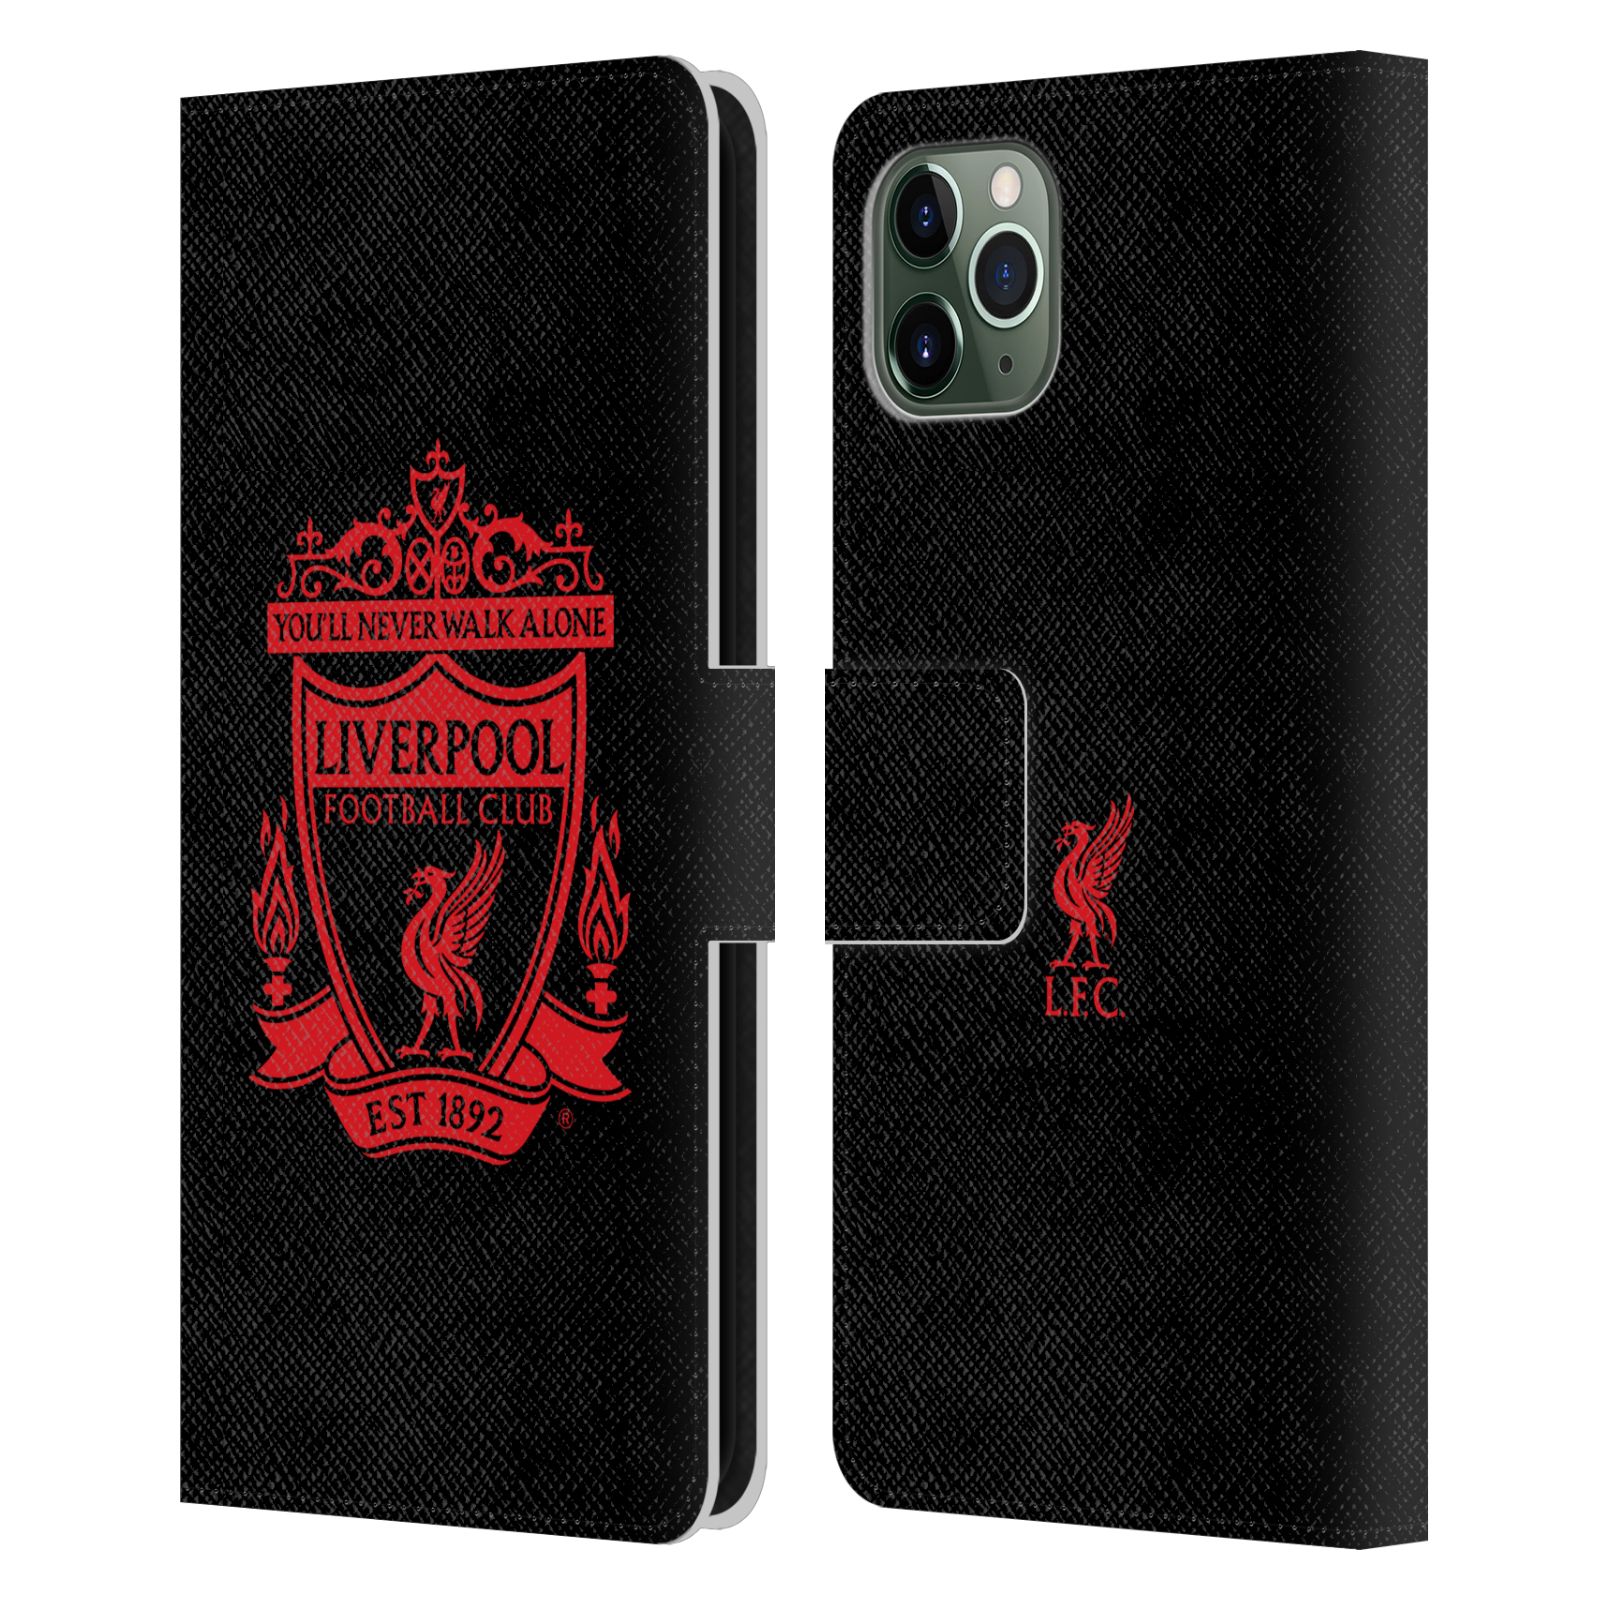 Official Liverpool Football Club Home Red Digital Camouflage PU Leather Book Wallet Case Cover Compatible For Apple iPhone 6 Plus/iPhone 6s Plus